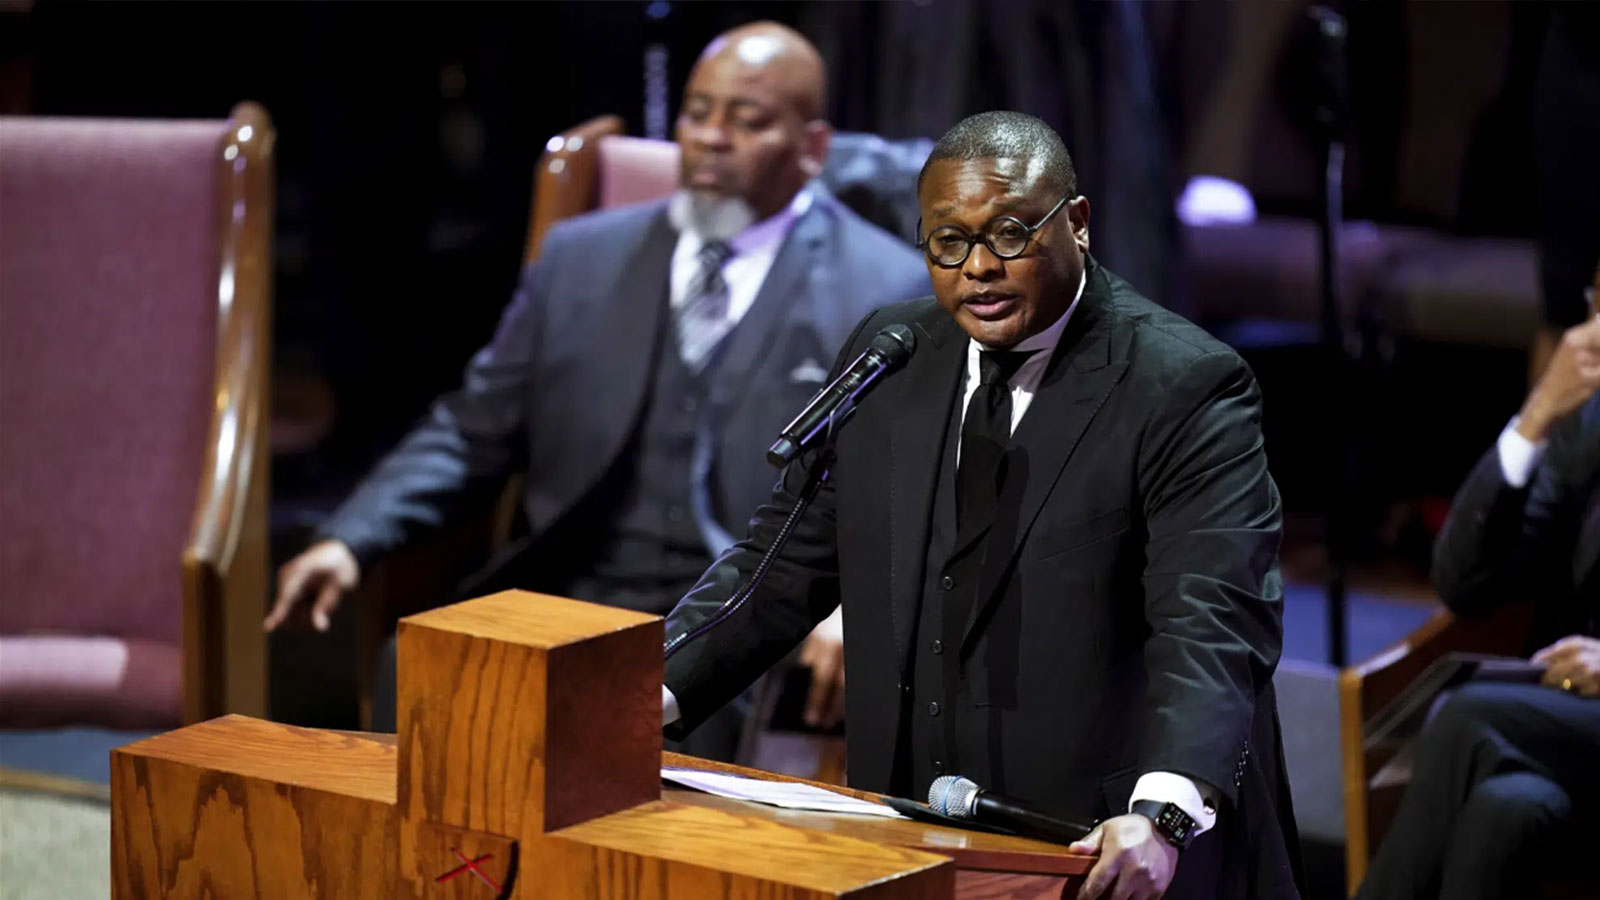 Rev. Dr. J. Lawrence Turner speaks during the funeral service for Tyre Nichols at Mississippi Boulevard Christian Church in Memphis, Tenn., on Wednesday, Feb. 1, 2023. Nichols died following a brutal beating by Memphis police after a traffic stop.